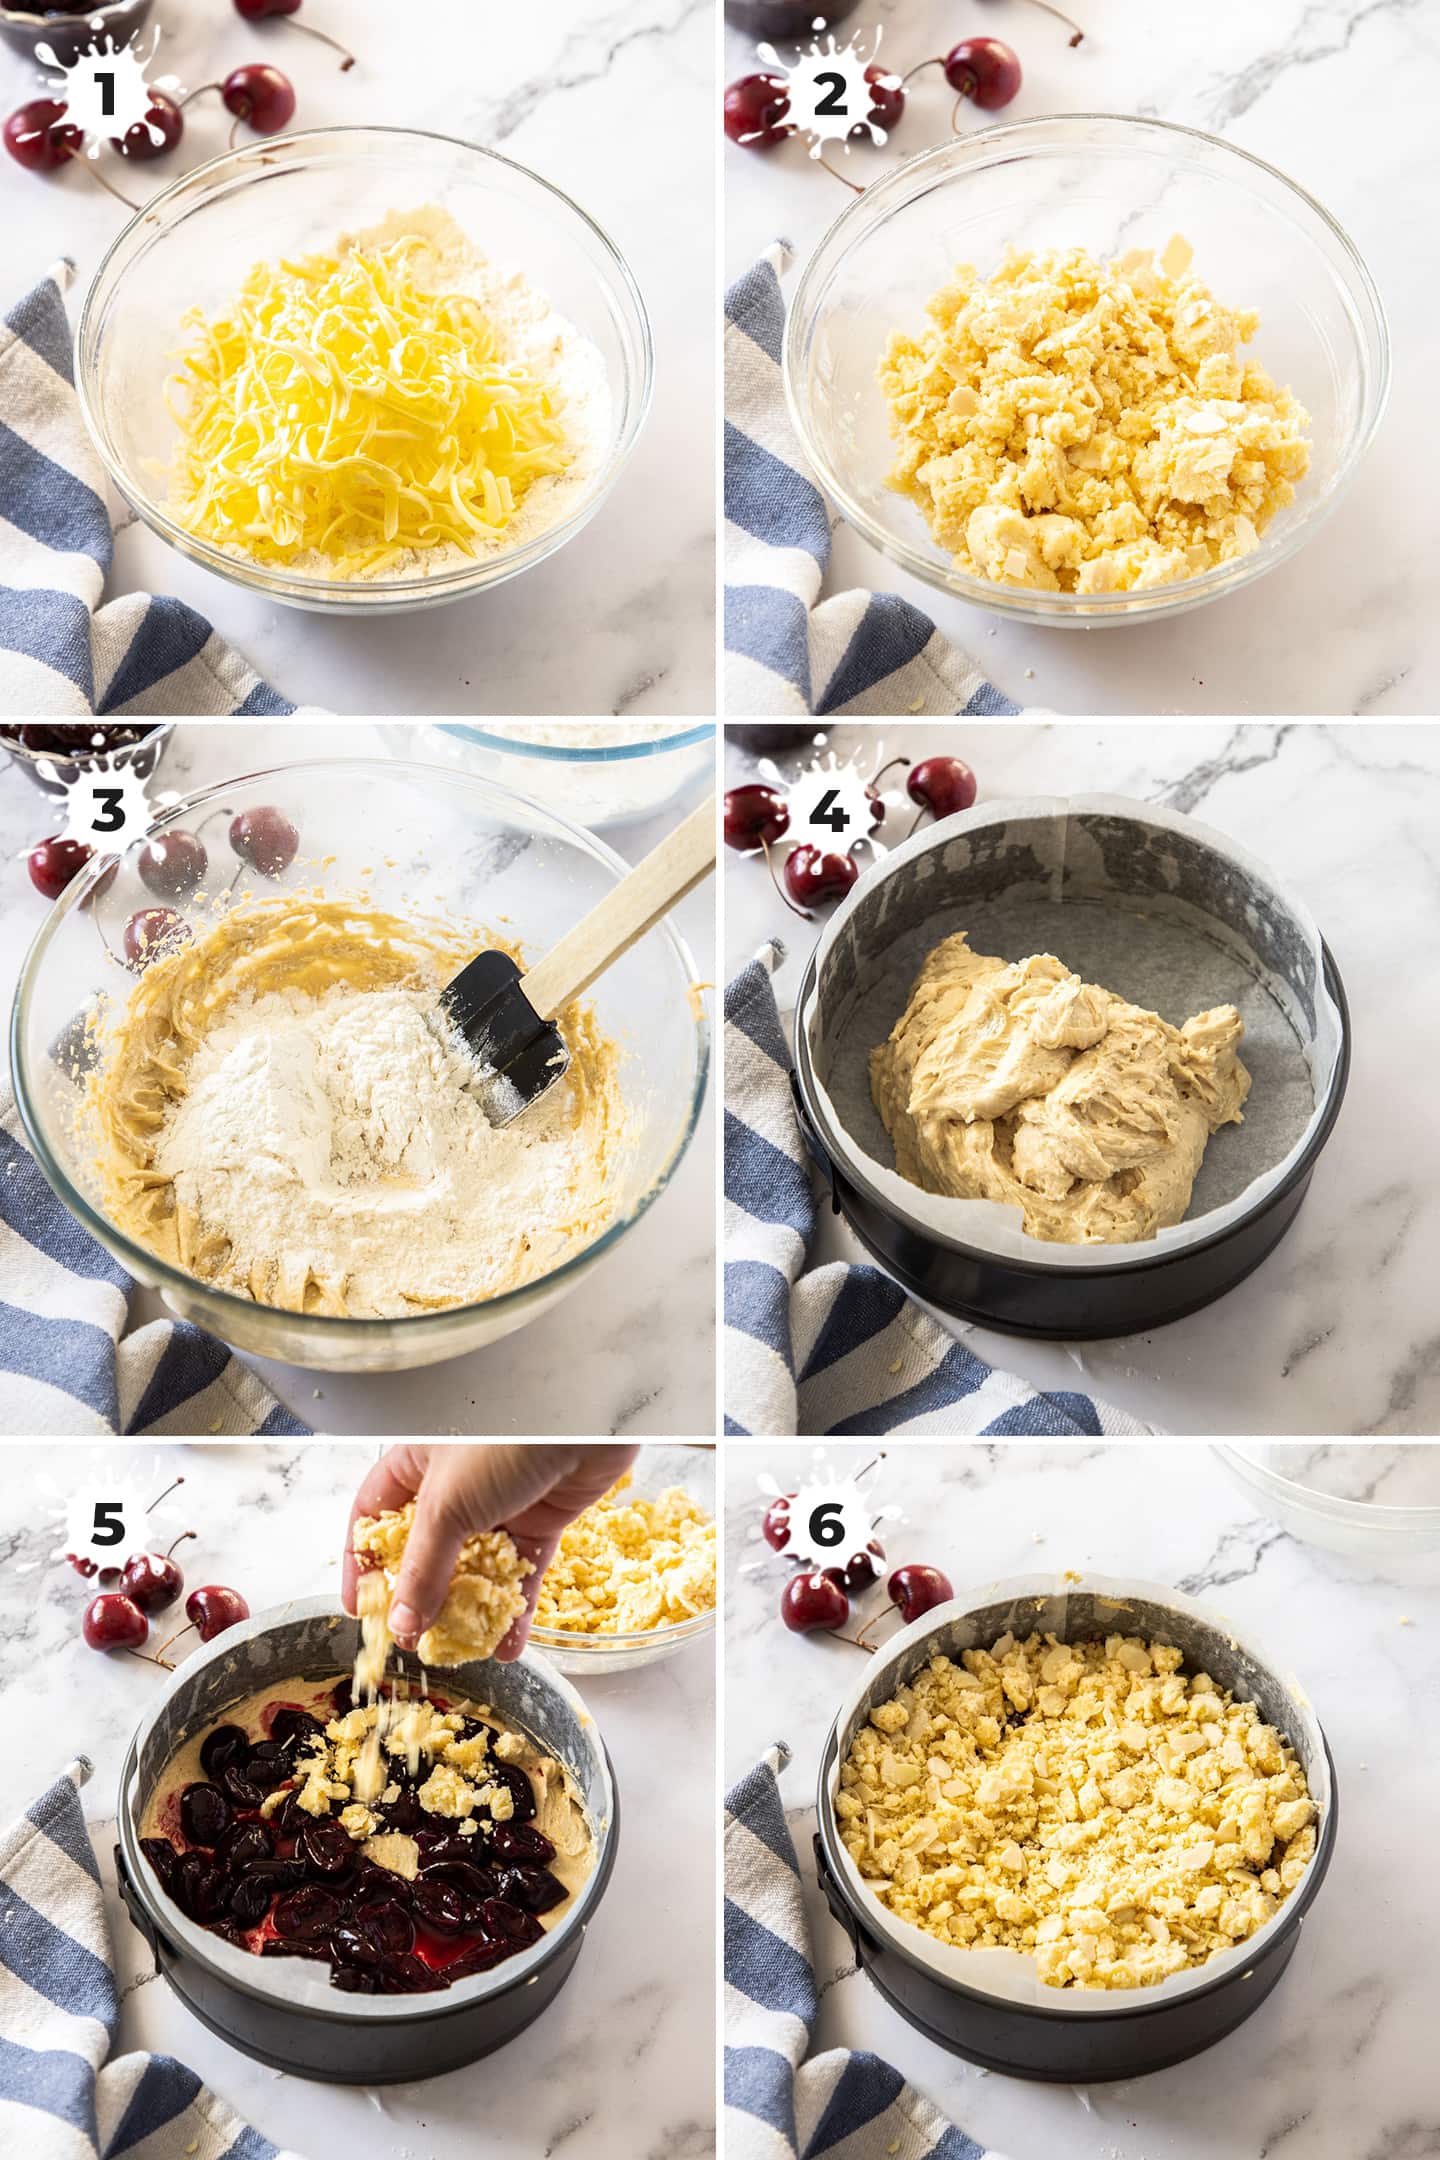 Images showing steps of making cherry cake.